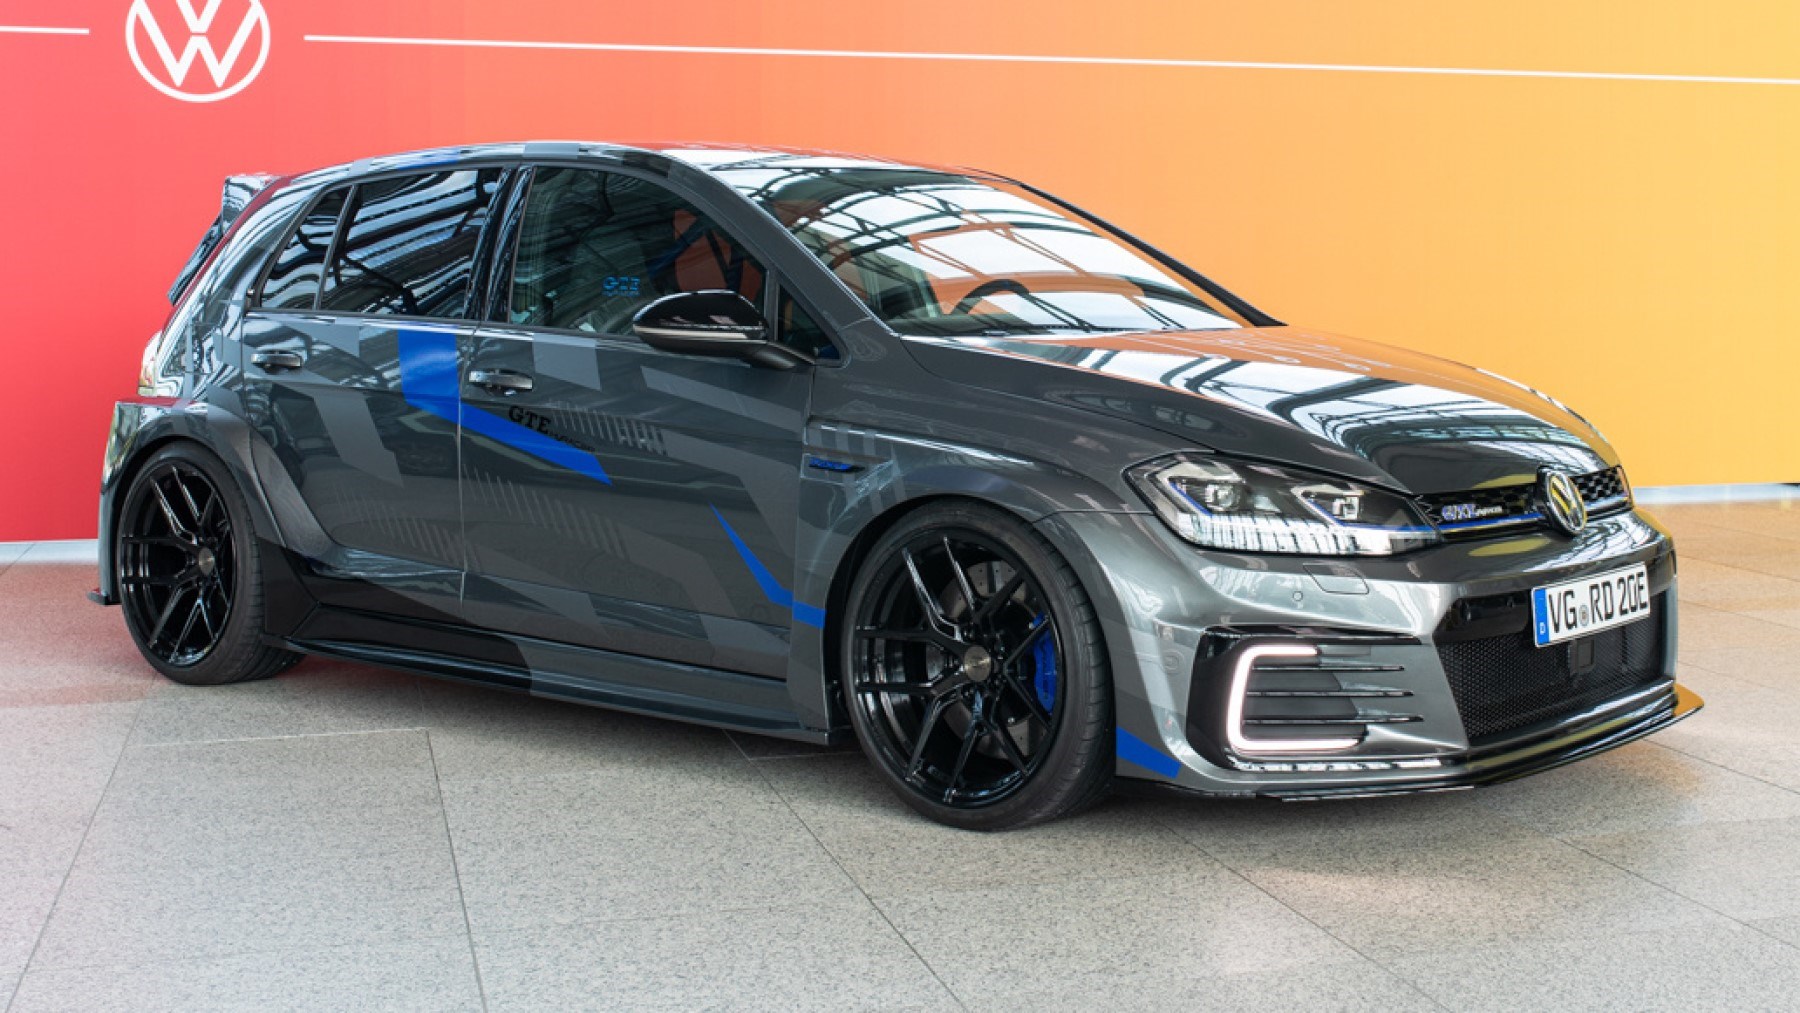 VW Golf GTE HyRacer student concept brings TCR glamour to hybrid hatch ...